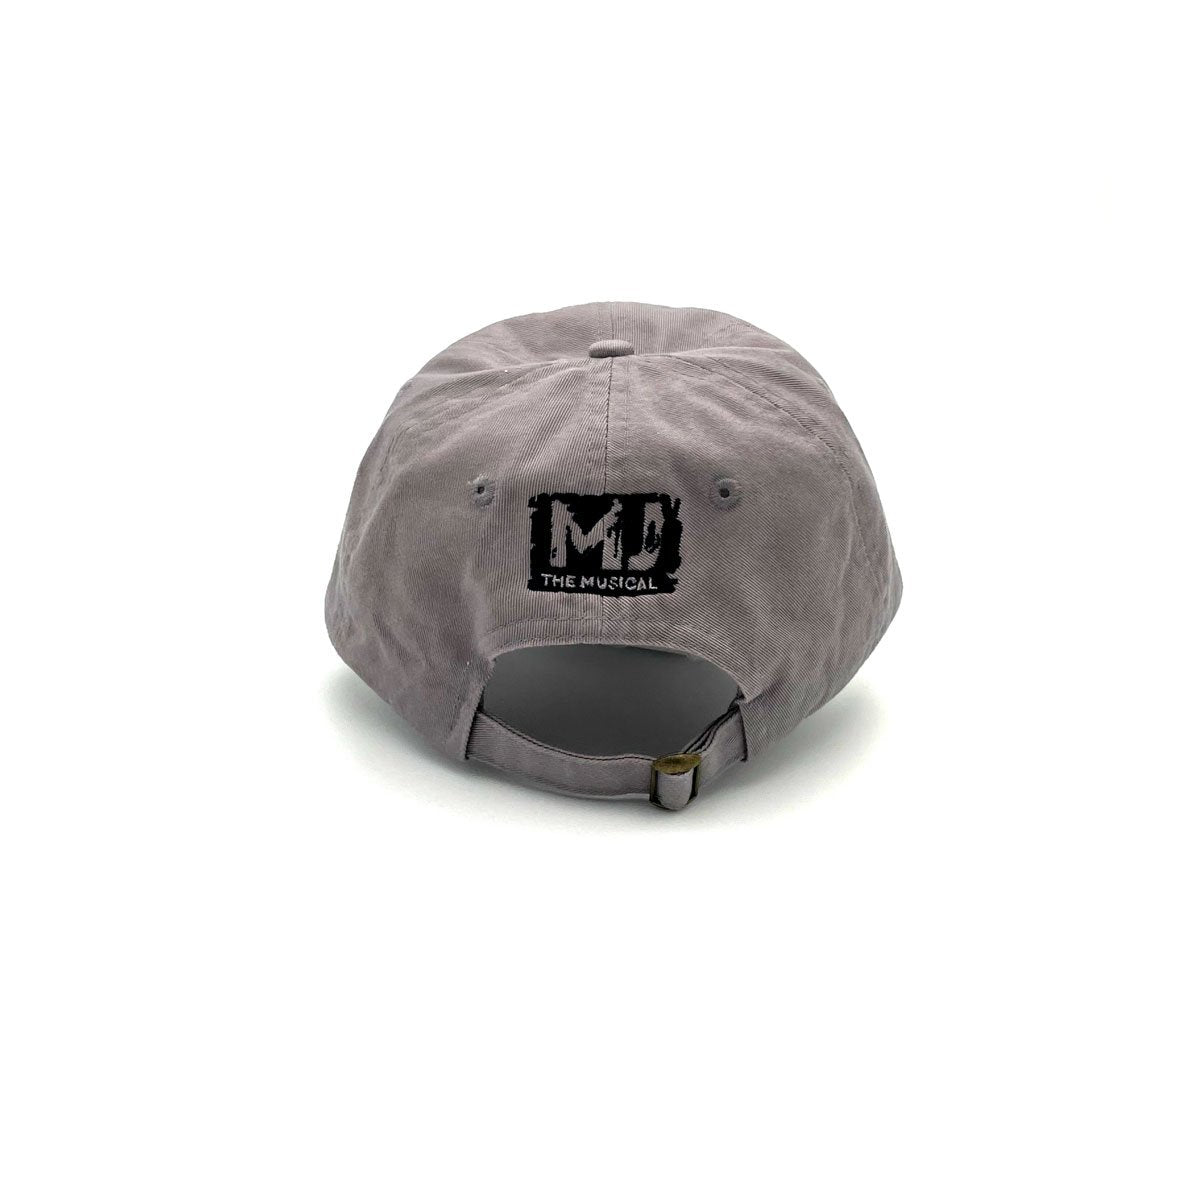 MJ THE MUSICAL Icon Cap - Grey